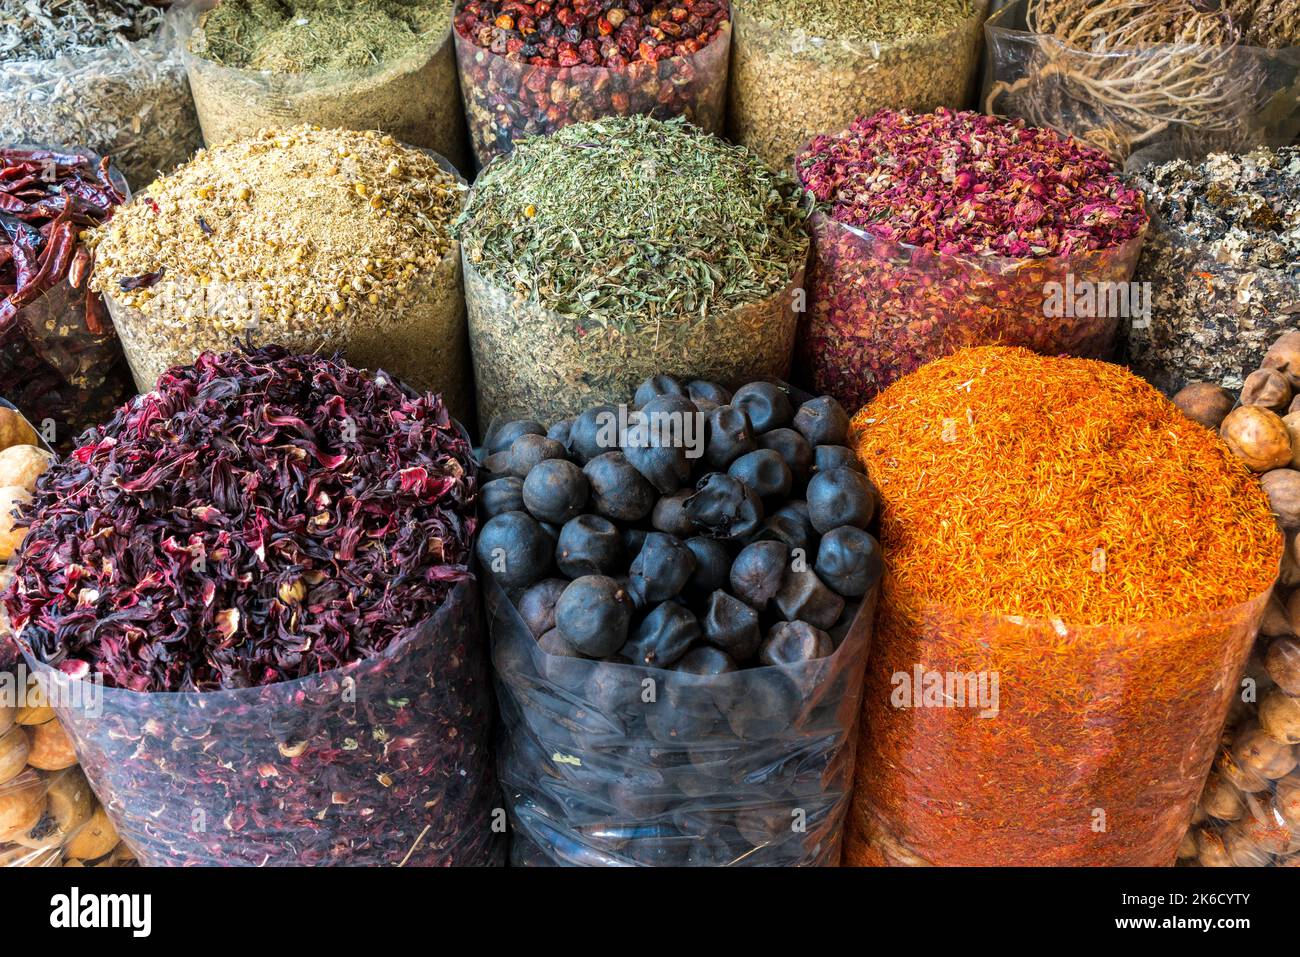 Bags of colorful spices at market in Dubai, United Arab Emirates Stock Photo